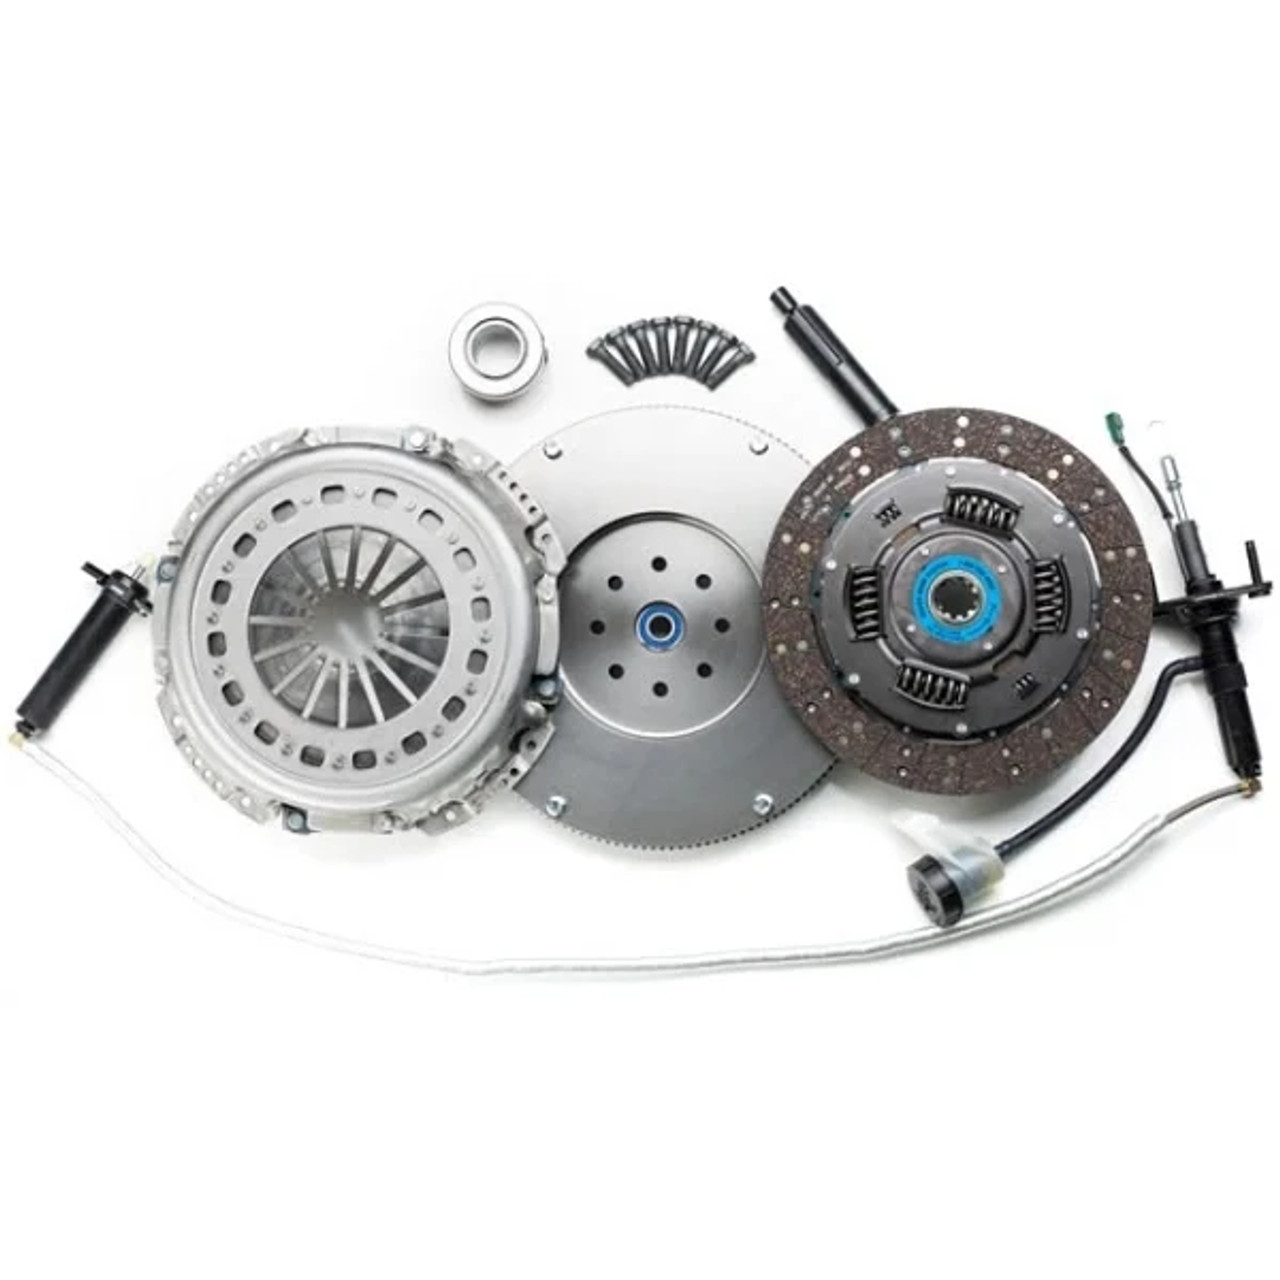 South Bend Dyna Max Upgrade Clutch Kit 2005.5 to 2018 5.9L/6.7L Cummins with 6 Speed G56 Trans. (450 HP, 900 Ft. Lbs) (SBG56-OFEK)-Main View